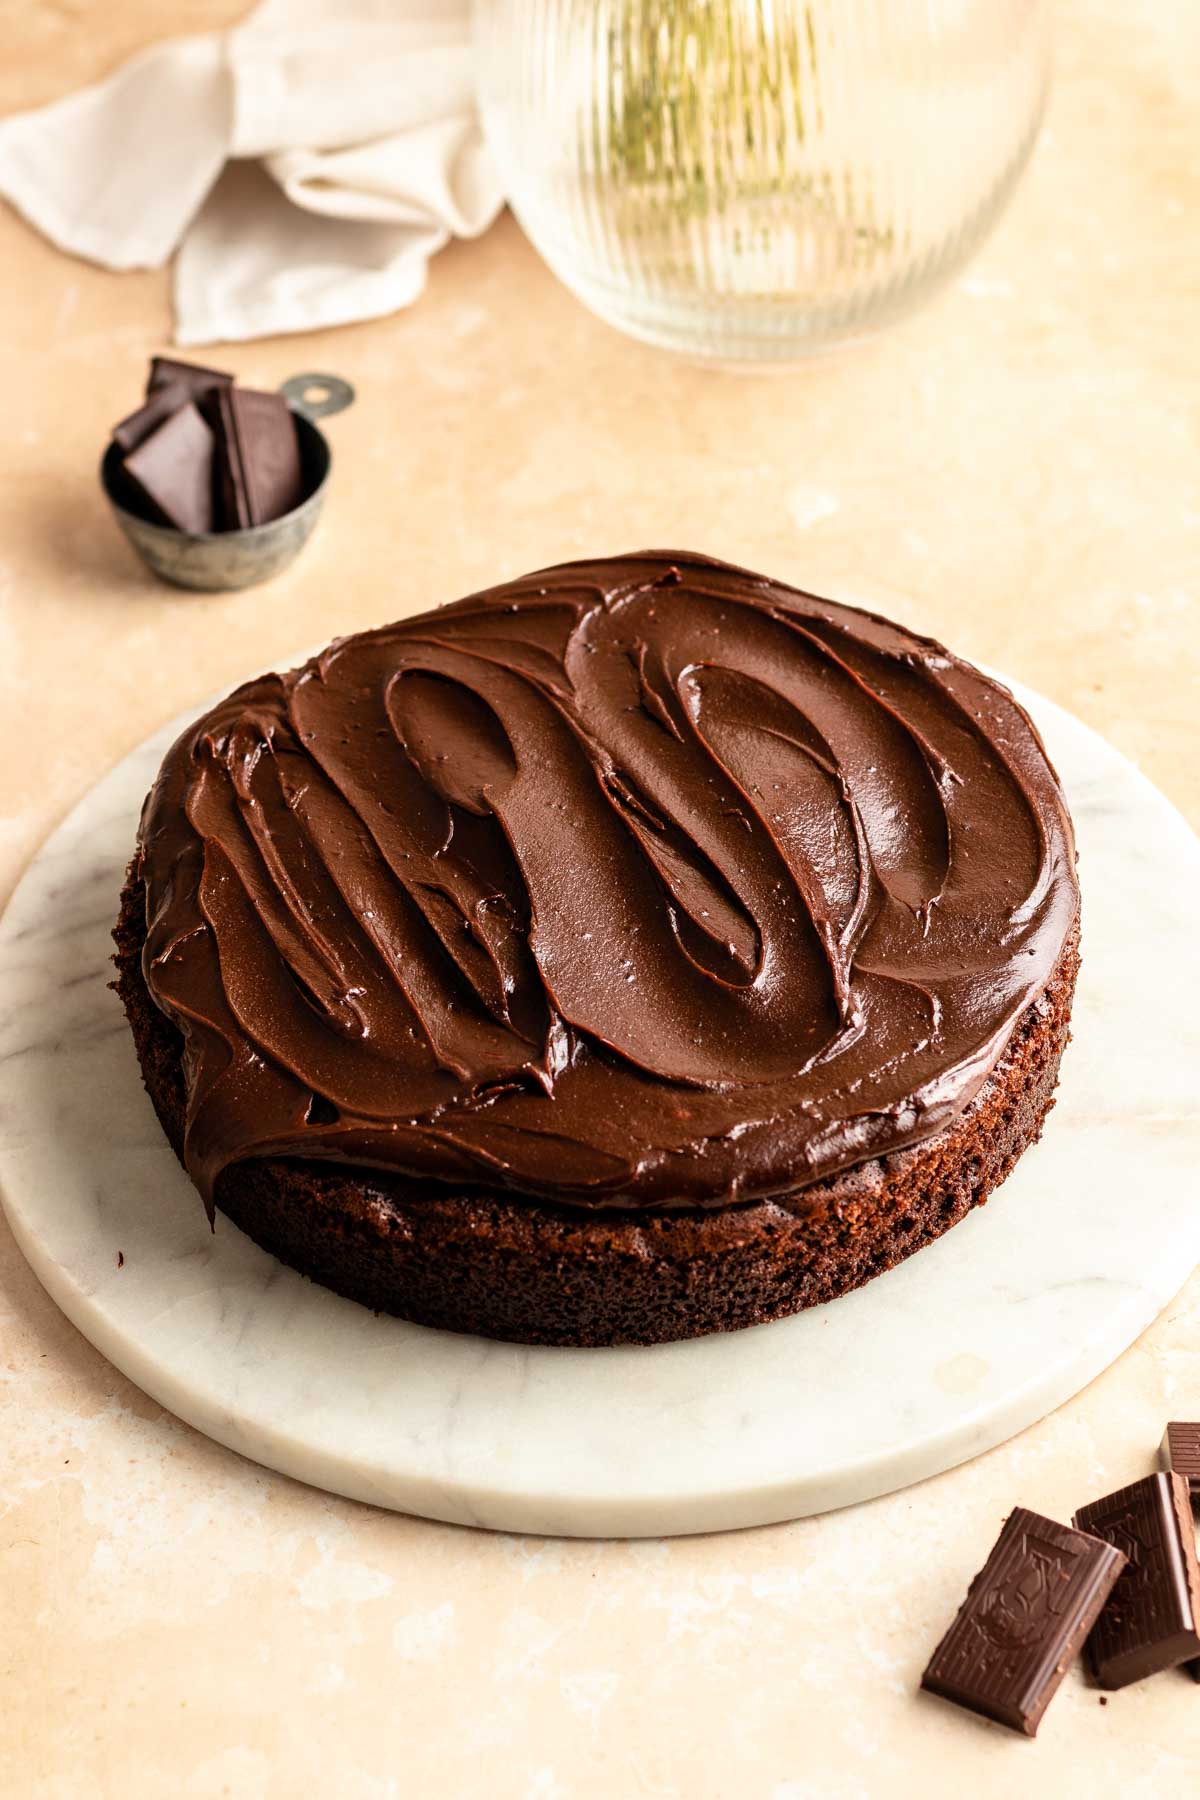 One layer of chocolate cake with frosting.